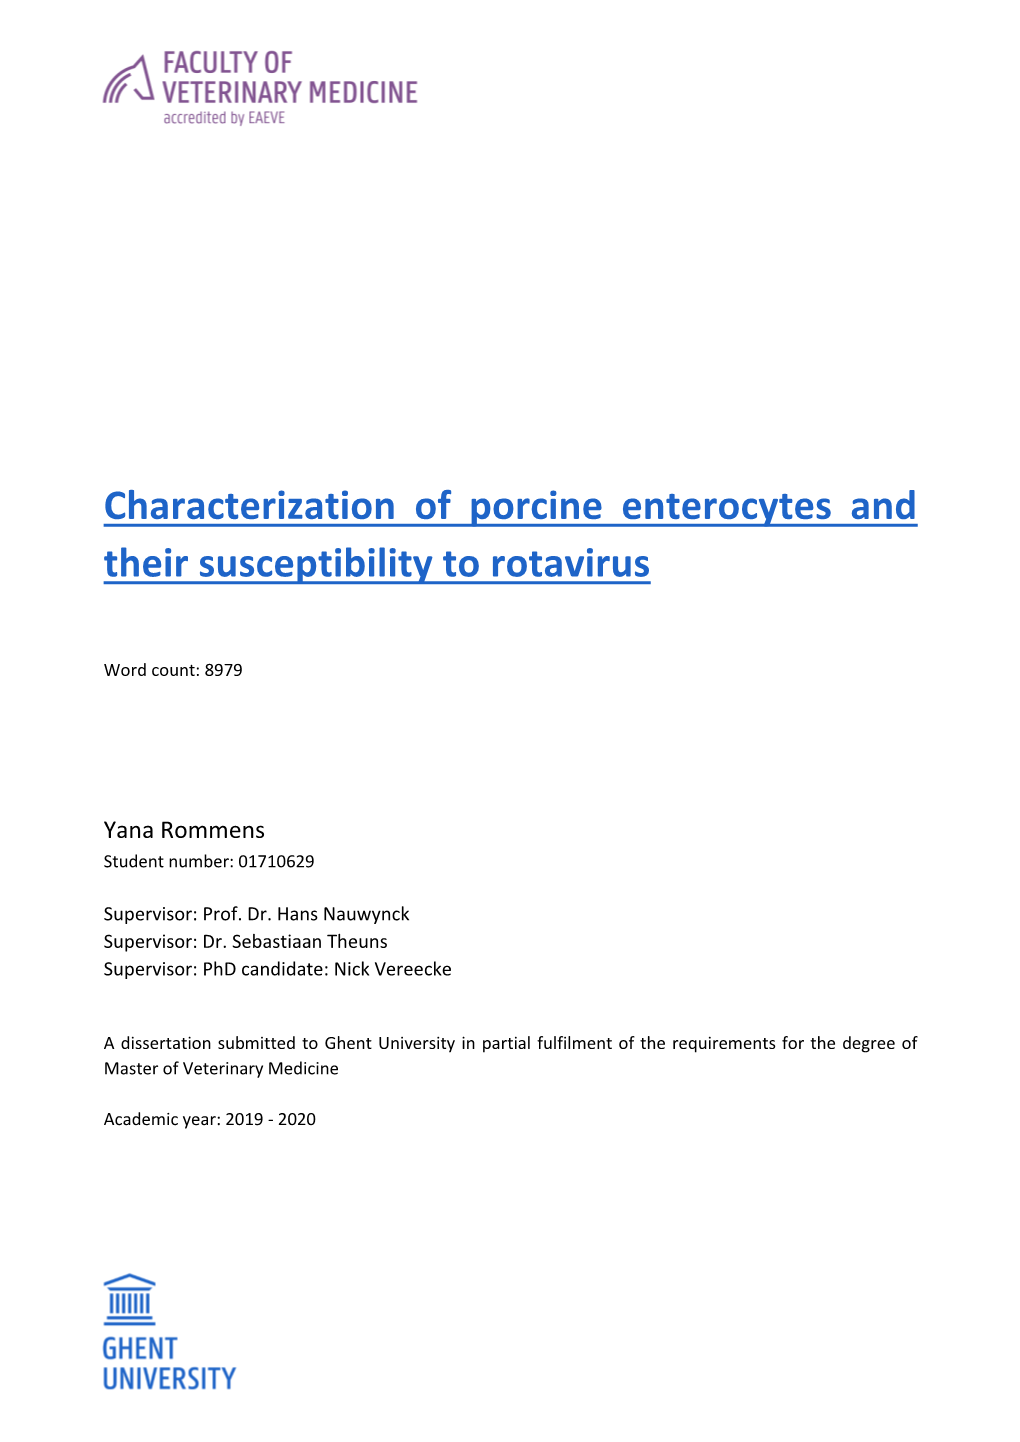 Characterization of Porcine Enterocytes and Their Susceptibility to Rotavirus